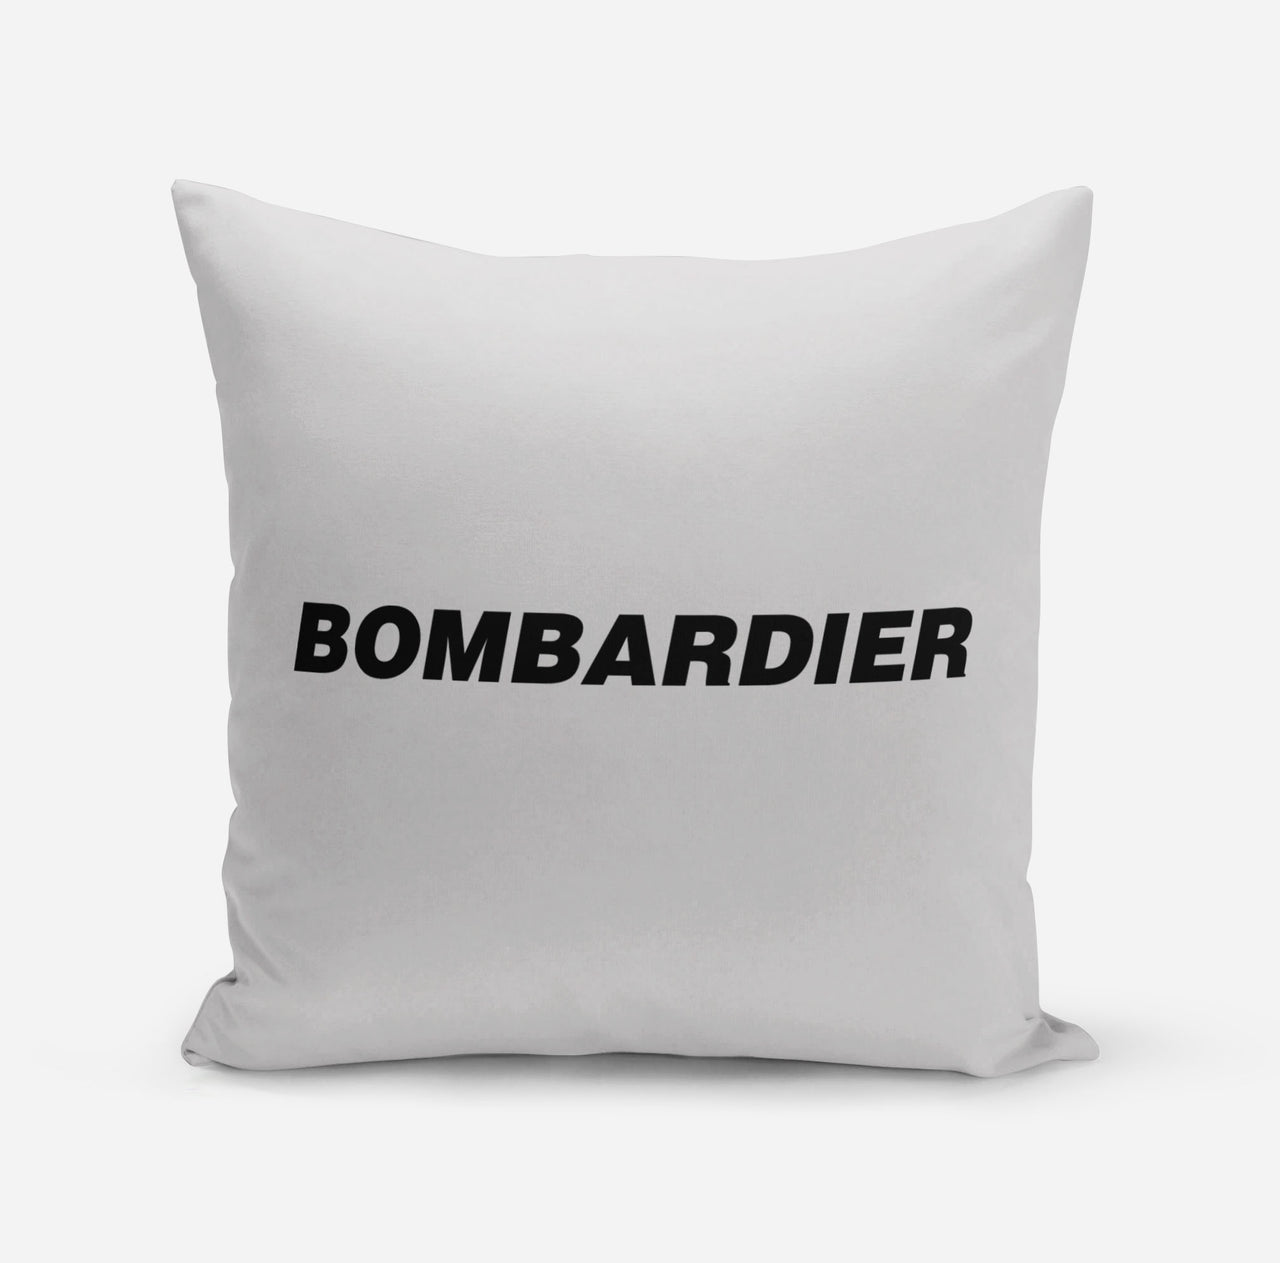 Bombardier & Text Designed Pillows